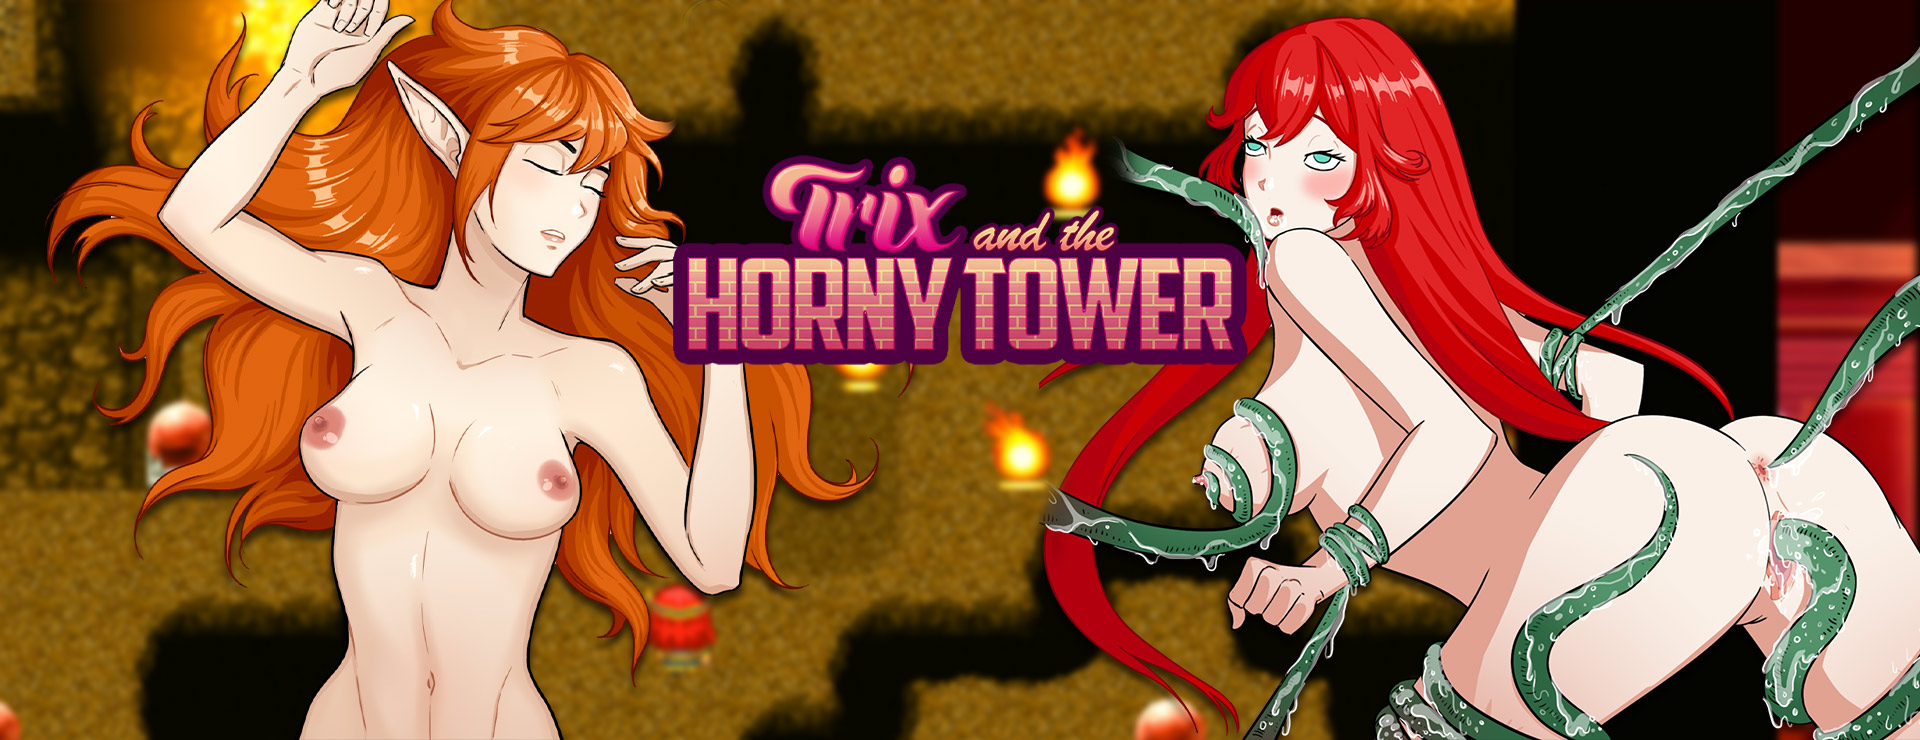 Trix and the Horny Tower - RPG Game